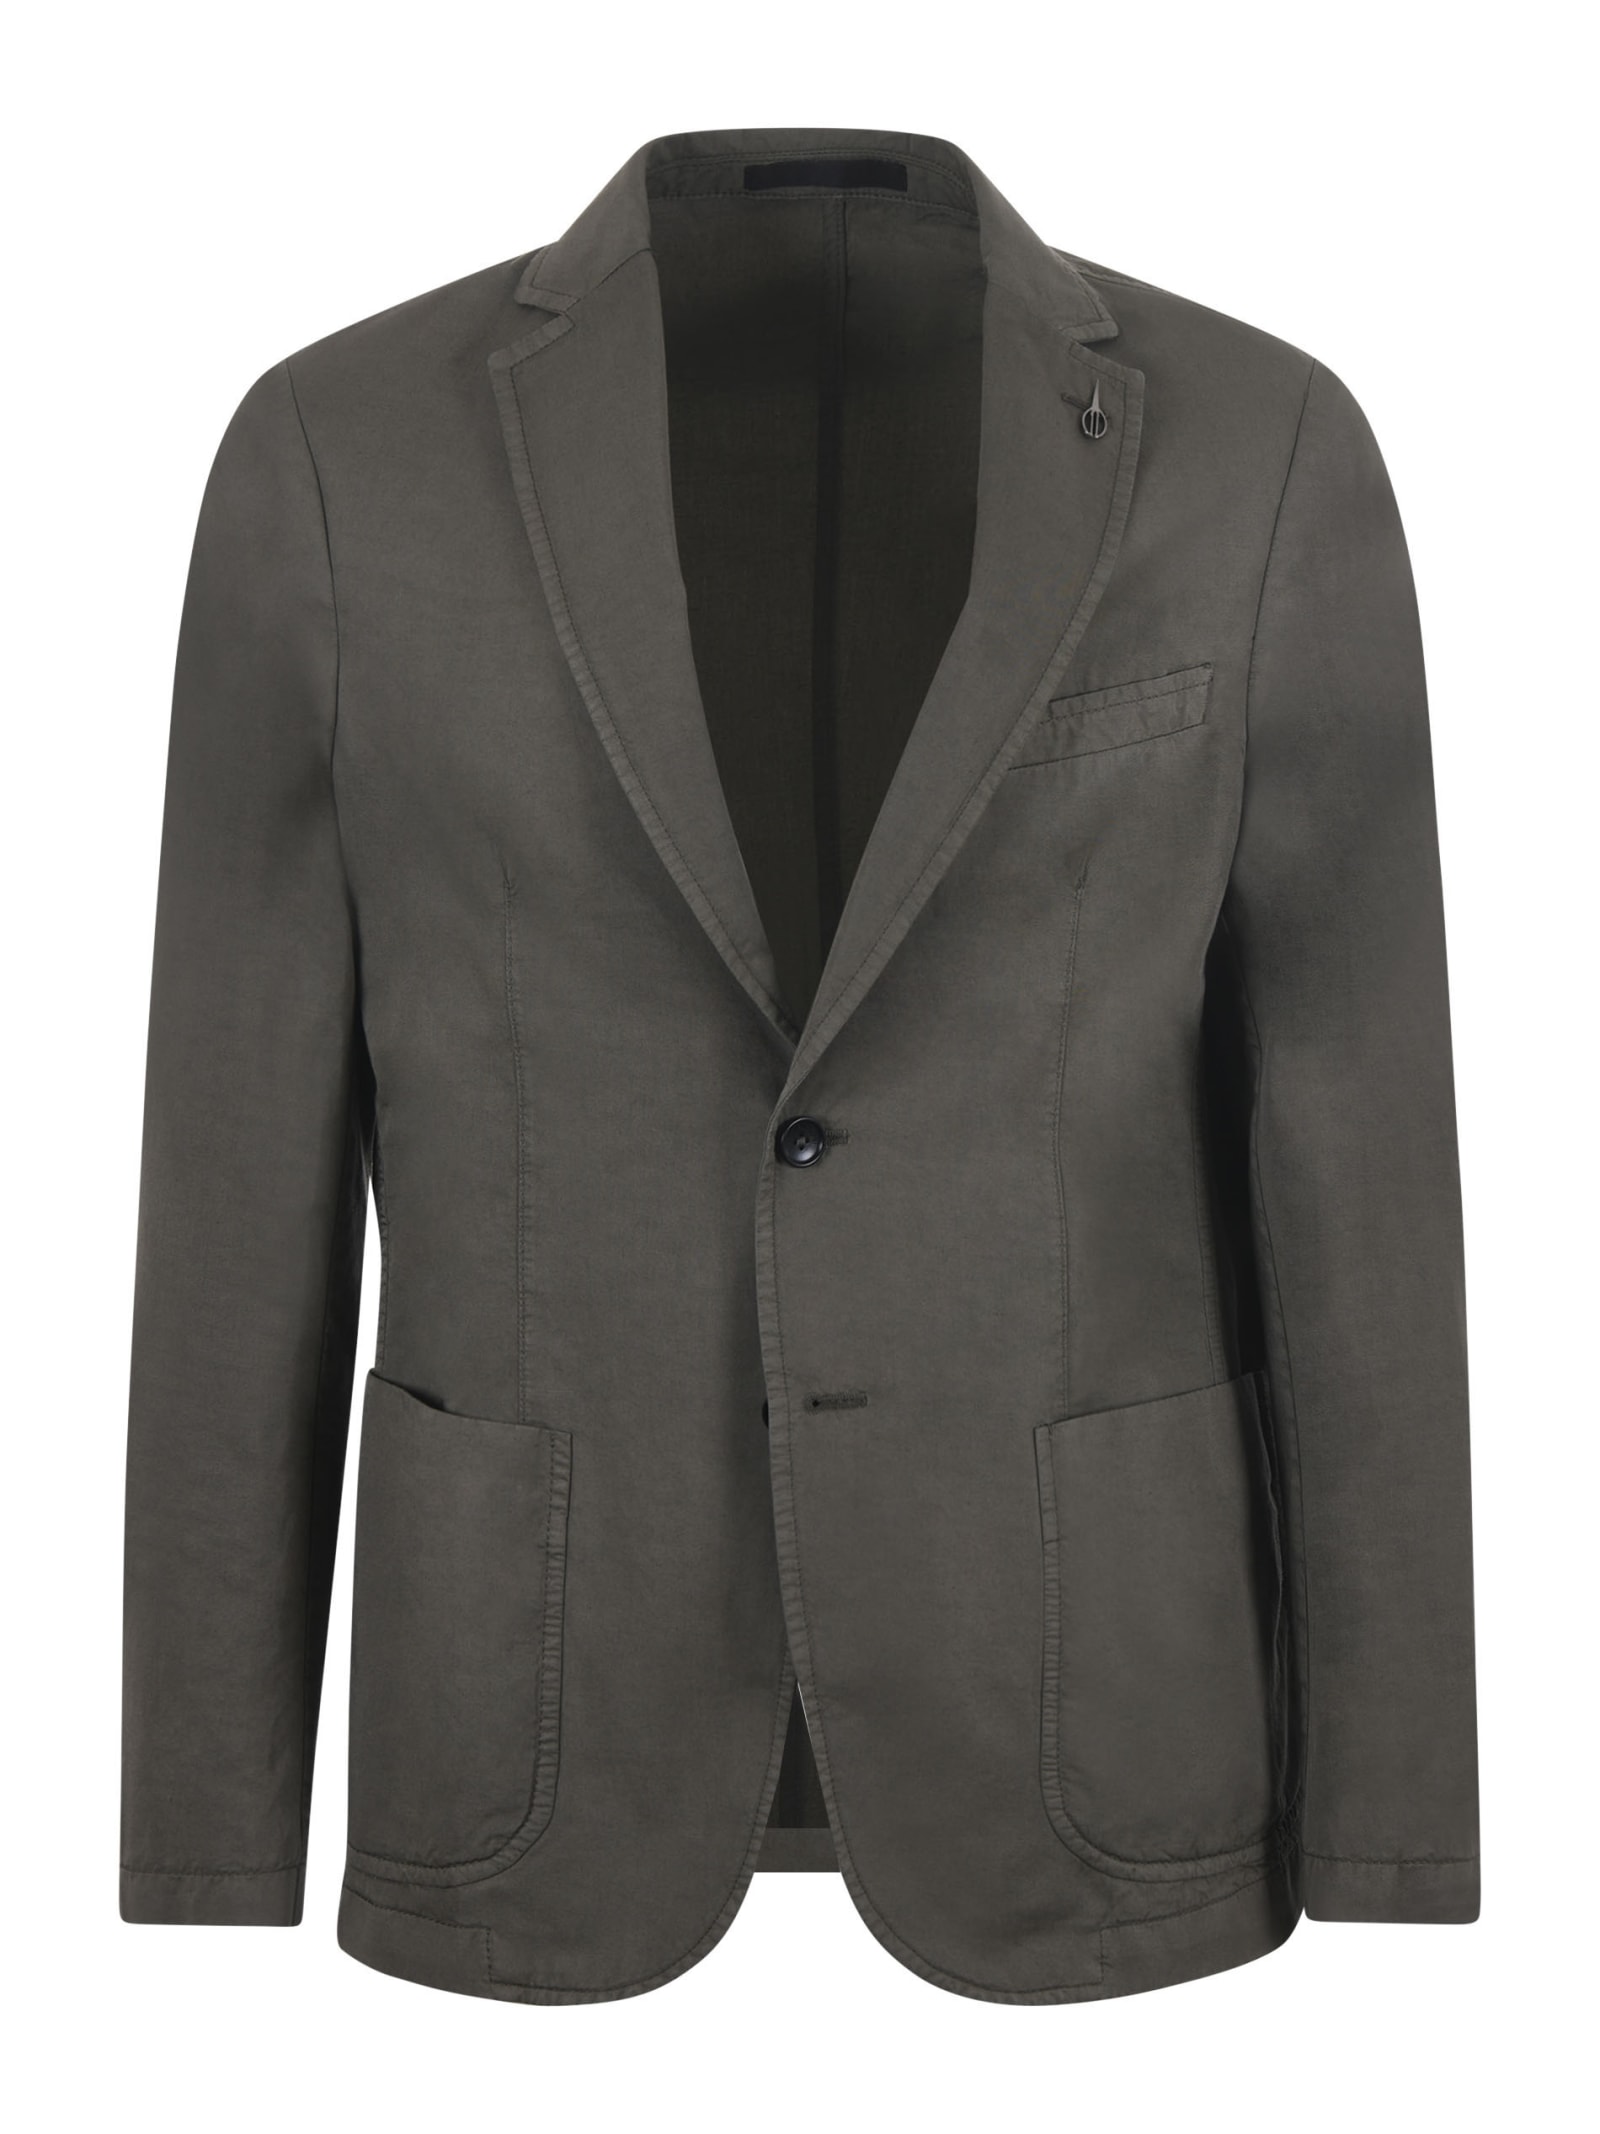 PAOLONI PAOLONI JACKET IN COTTON AND LINEN BLEND